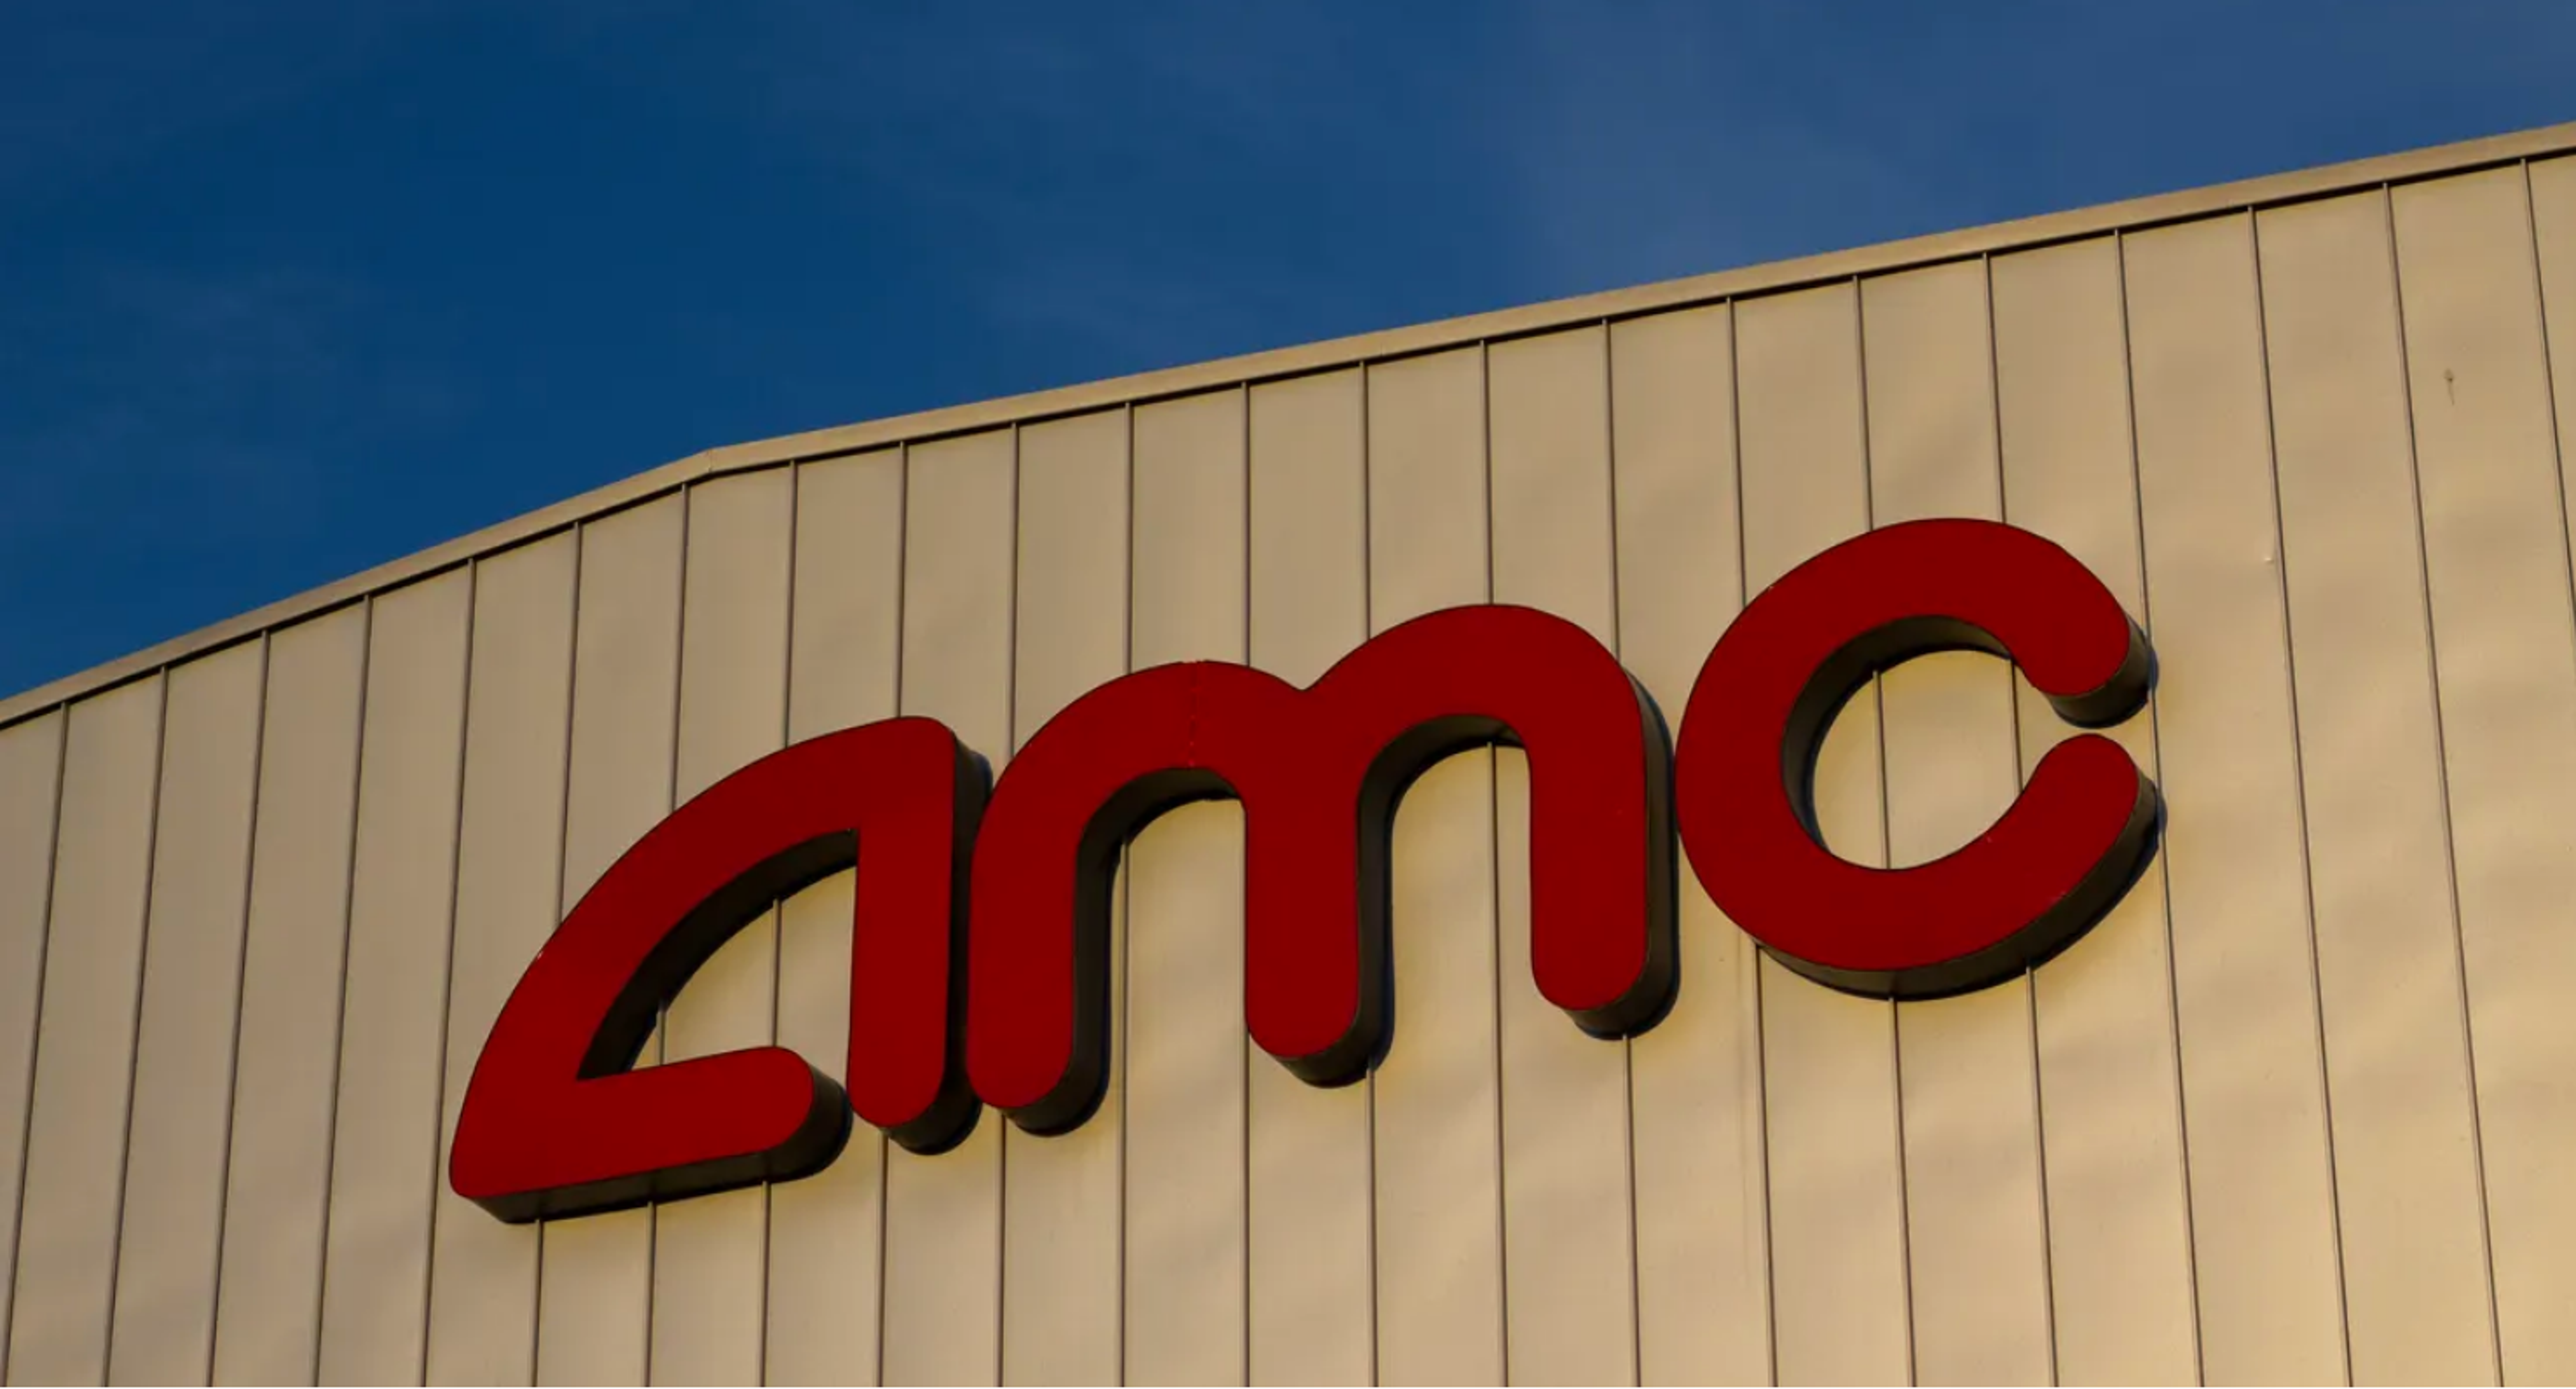 Is AMC Stock Overvalued? Blame Retail Investors, Analyst Says